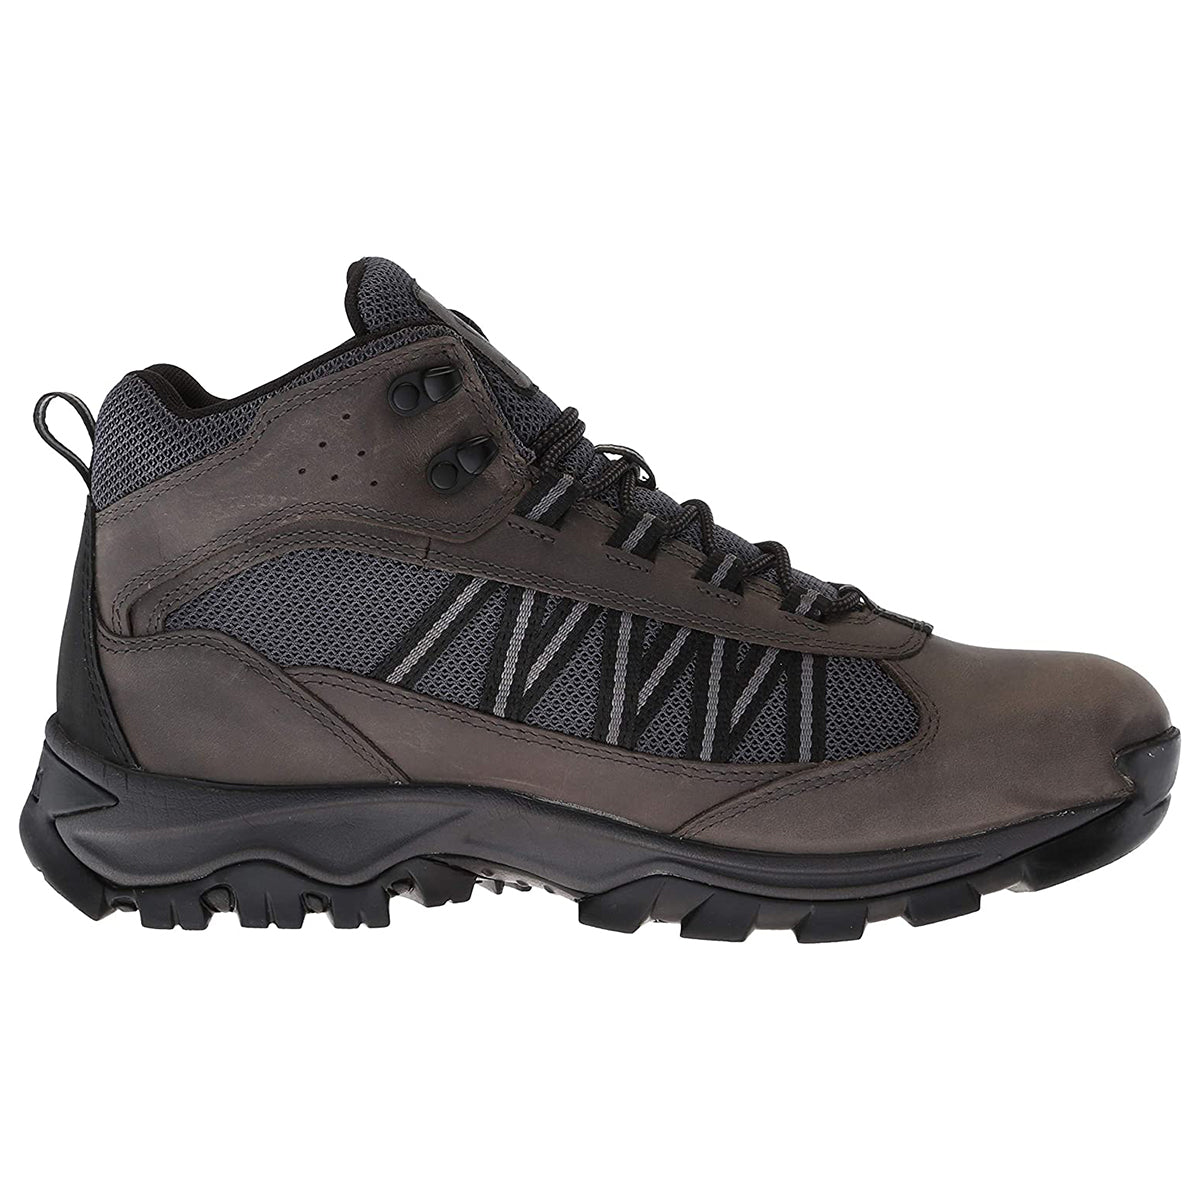 Timberland Mt. Maddsen Lite Waterproof Mid Hiker Boot Mens Style : Tb0a1rmc